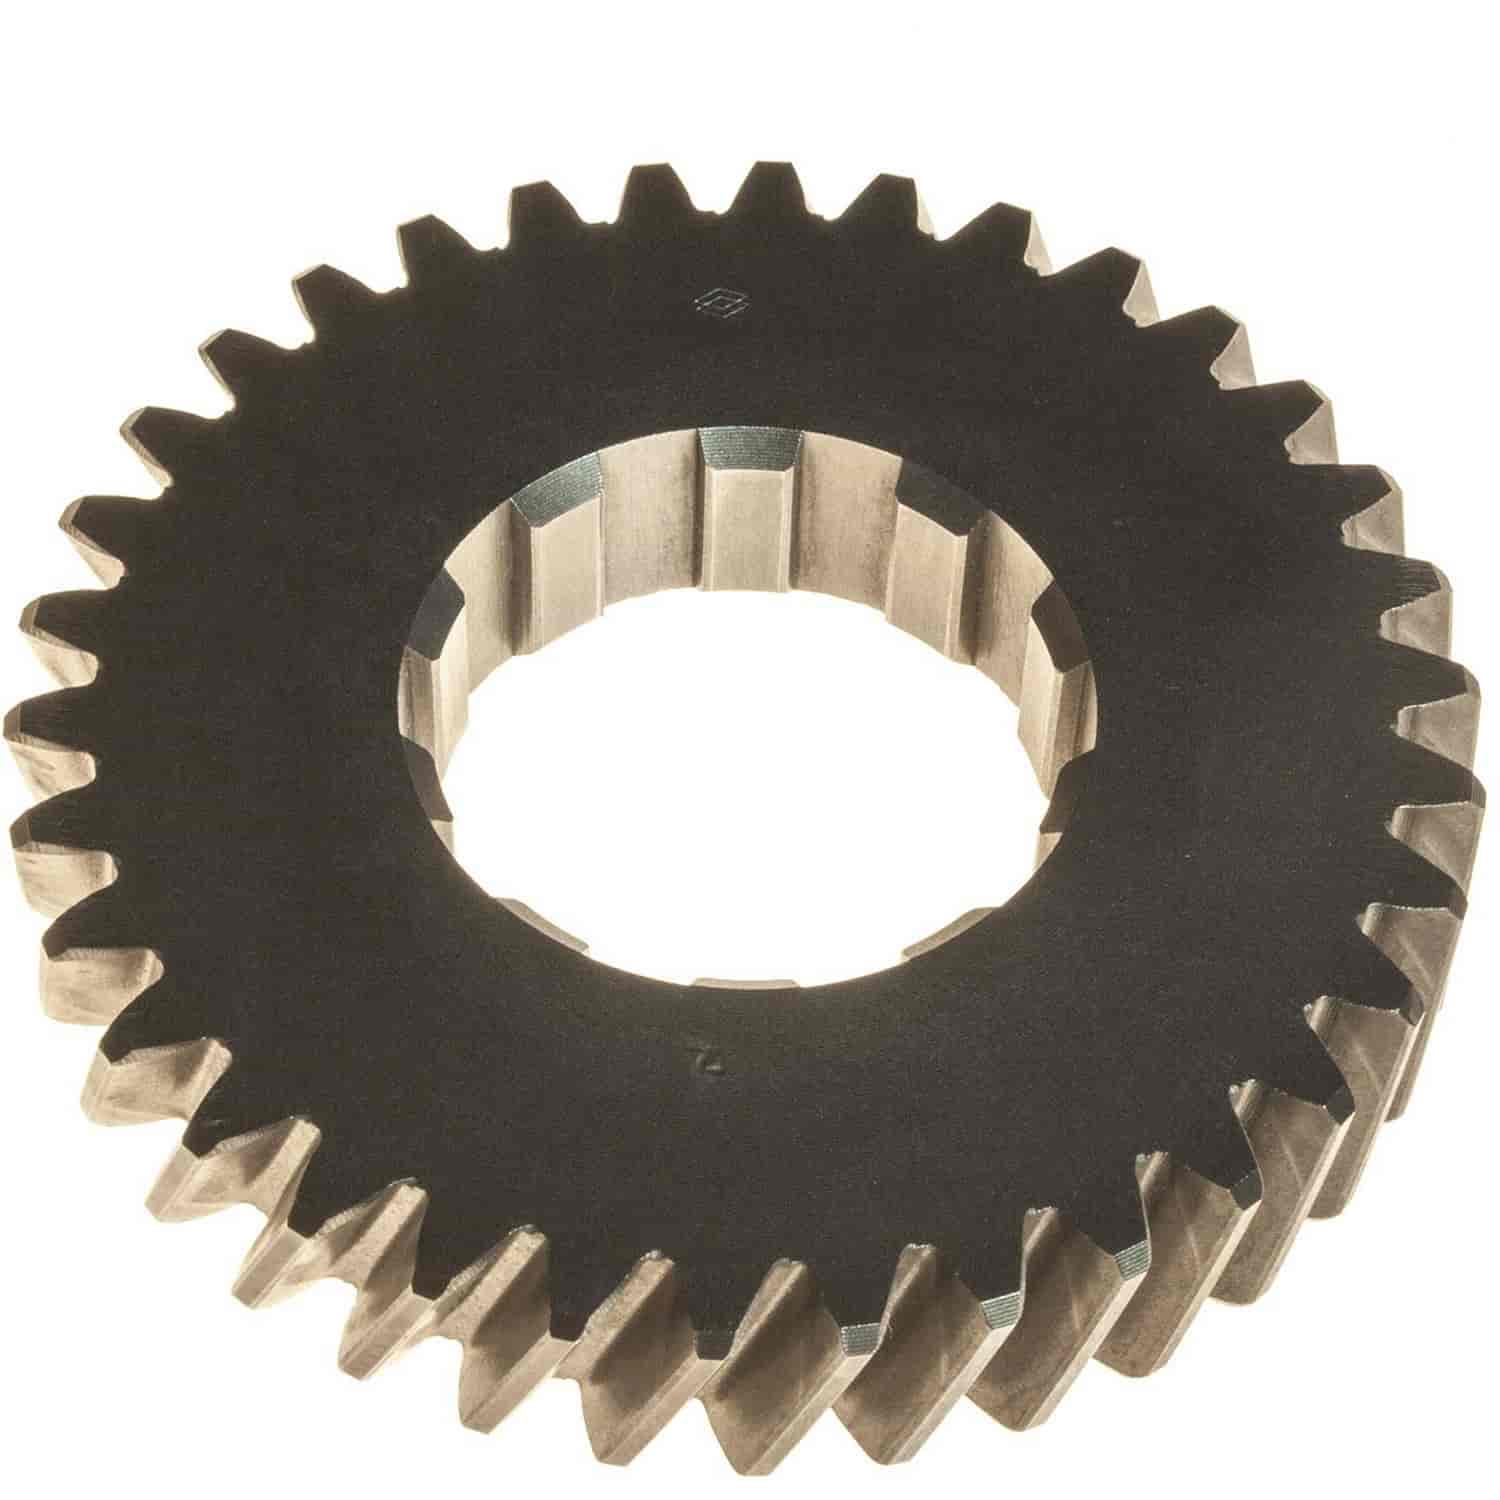 4th Gear Clustershaft 34/25 Tooth Count